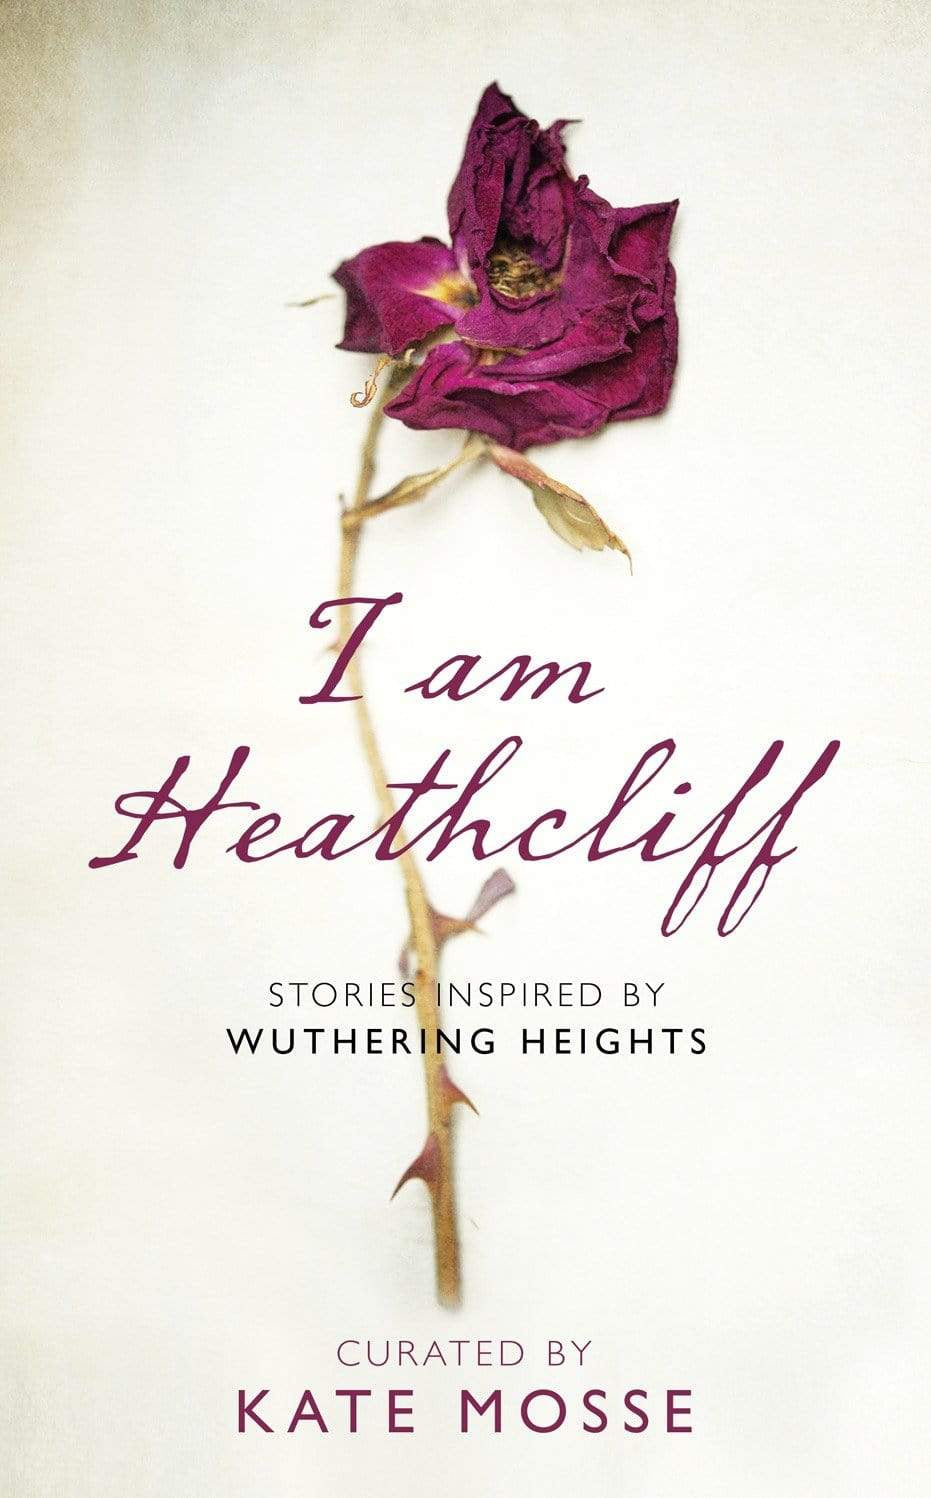 I AM HEATHCLIFF: STORIES INSPIRED BY WUTHERING HEIGHTS